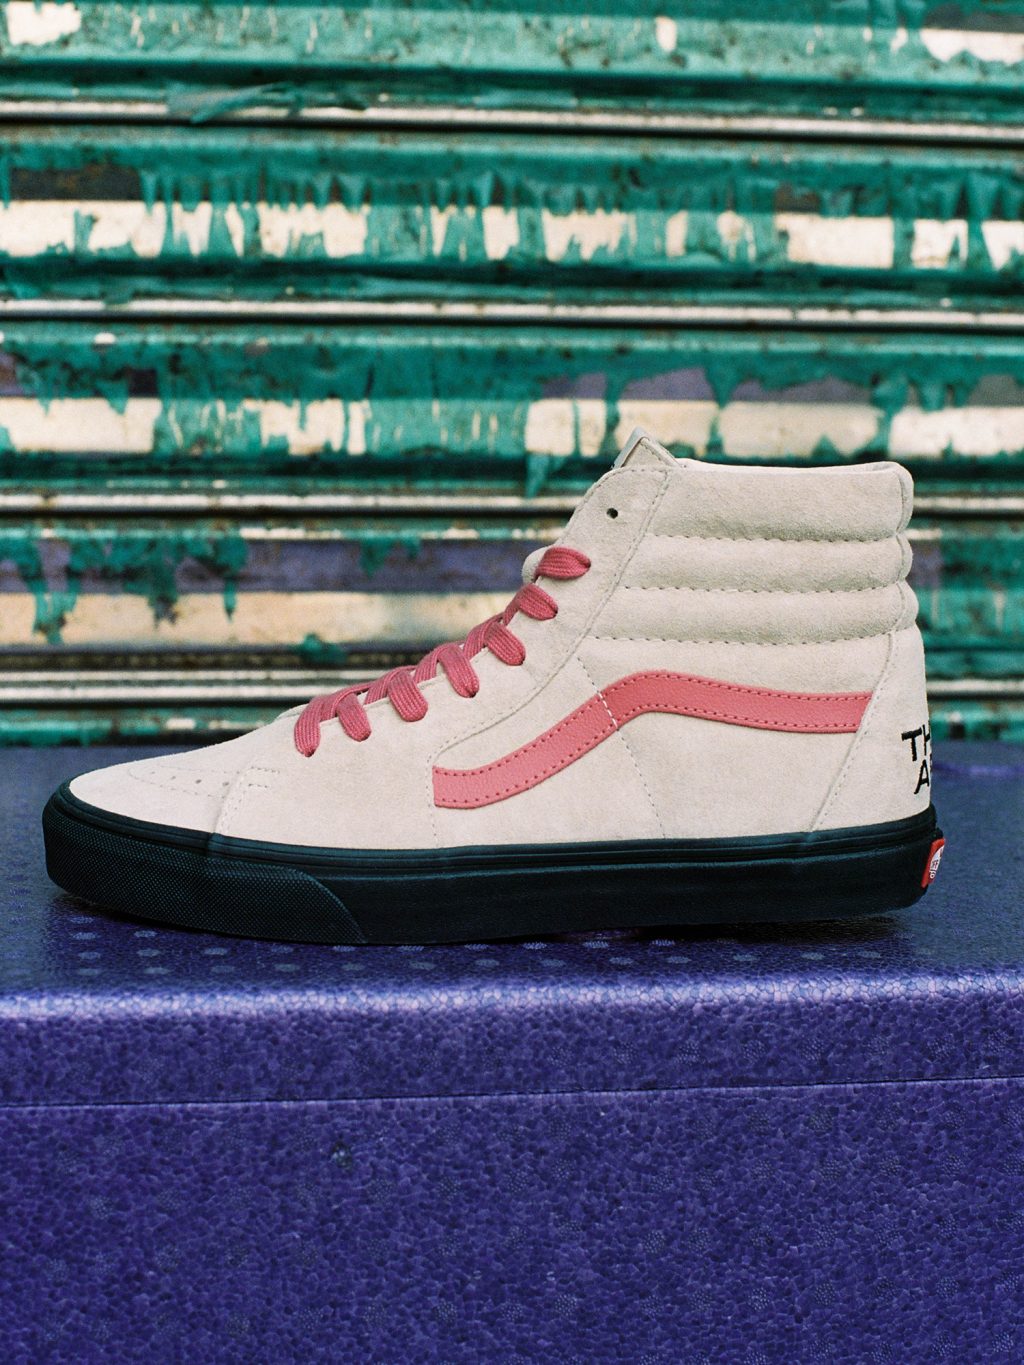 vans-they-are-year-of-ox-2021-collection-release-20210101